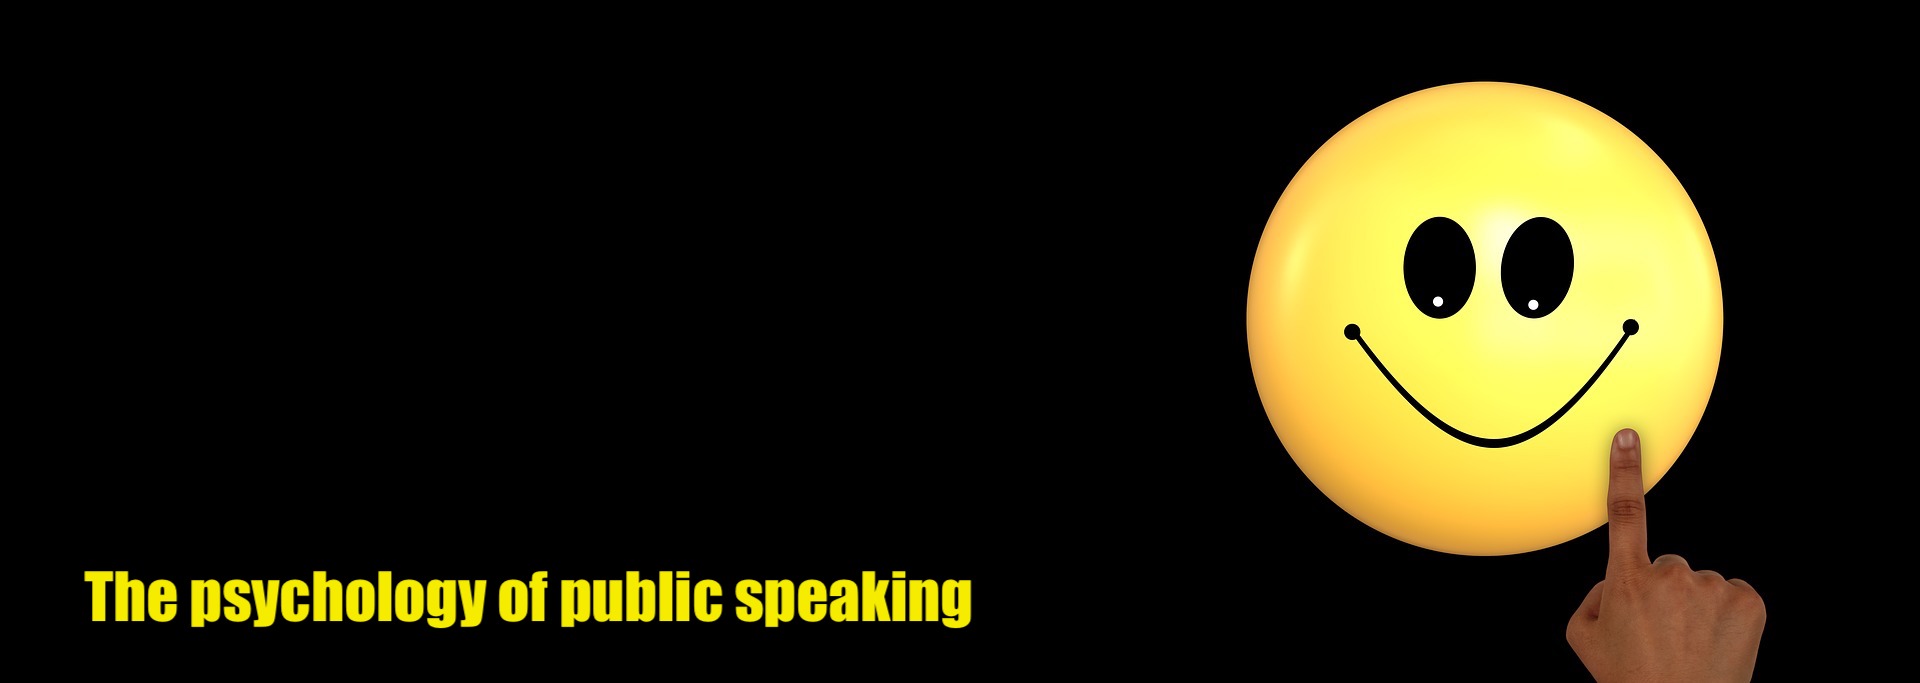 The psychology of public speaking